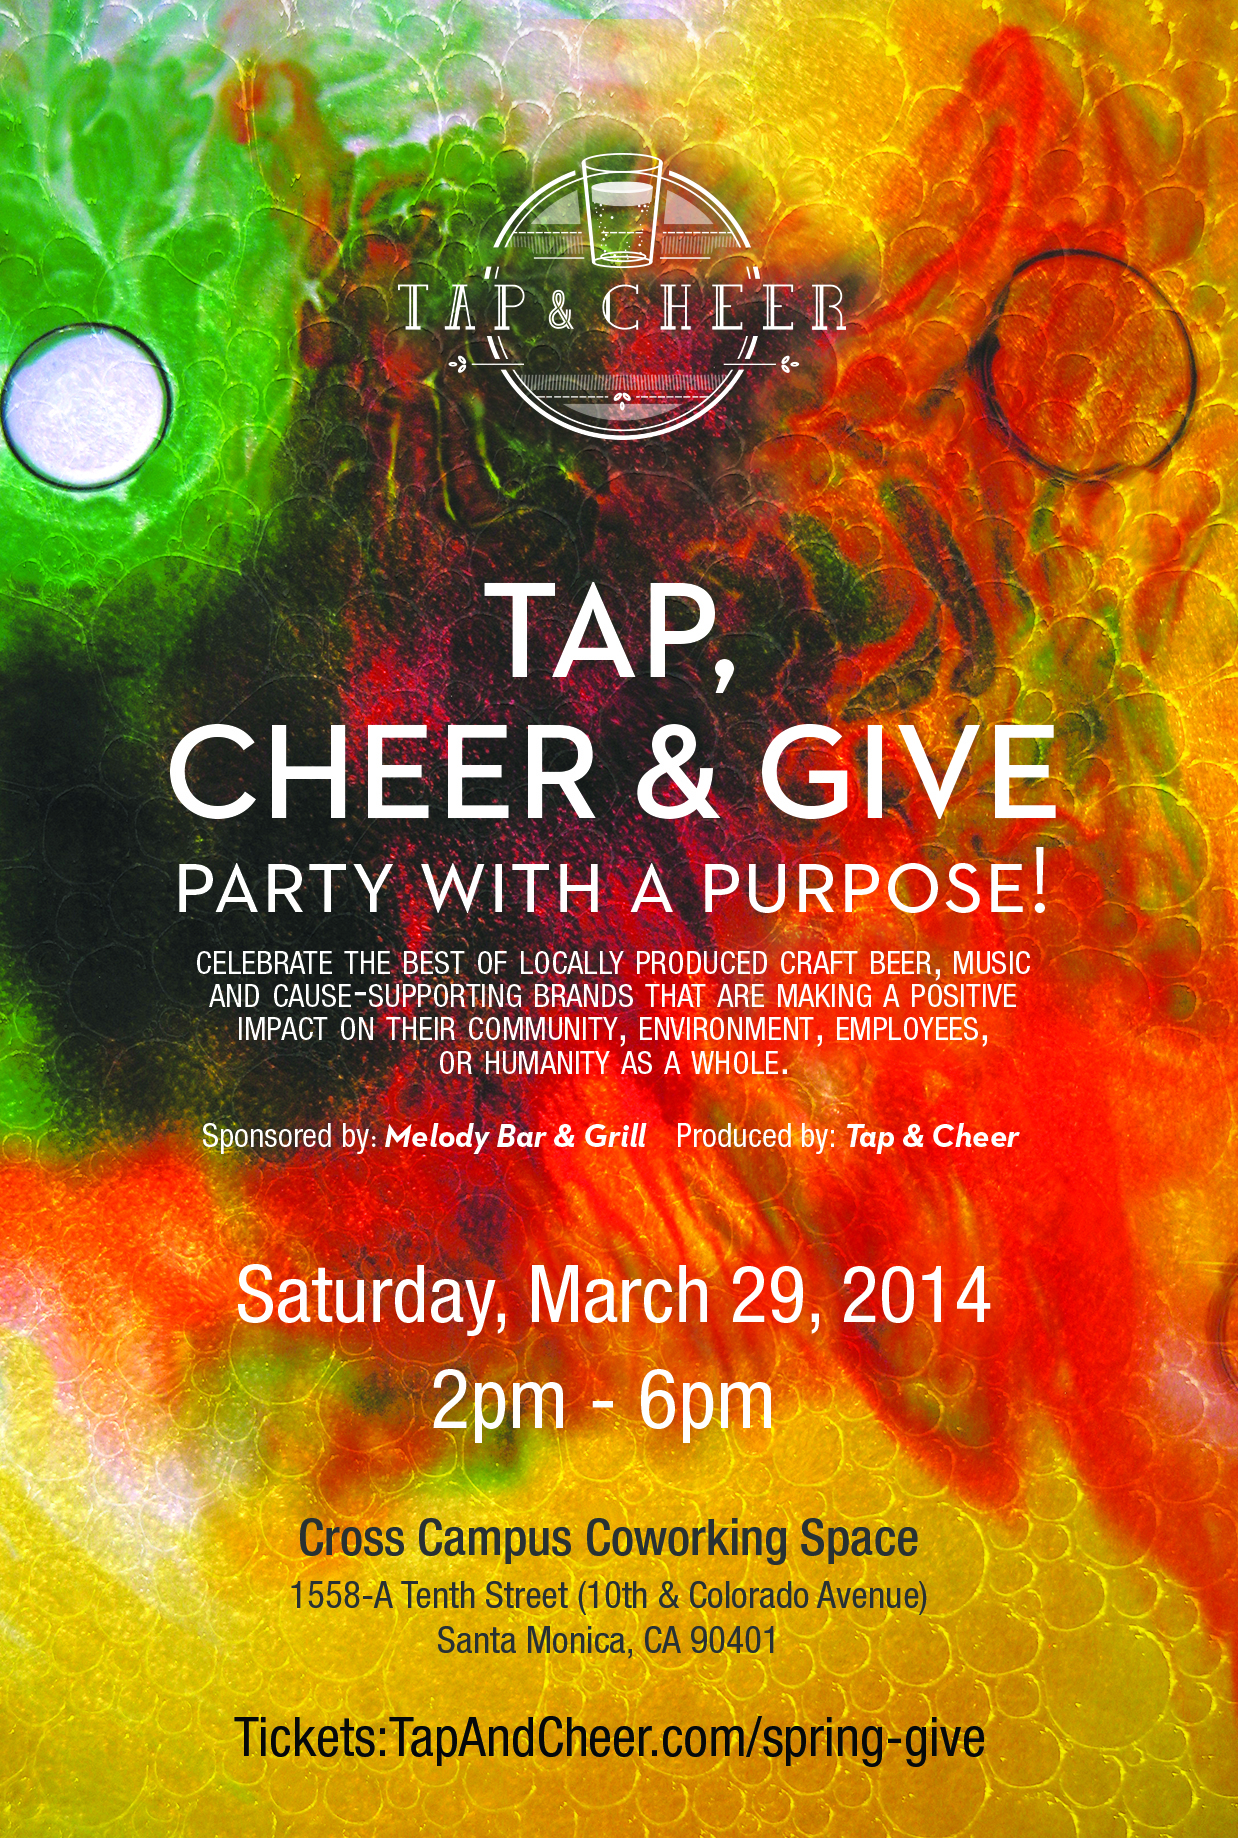 Tap Cheer & Give